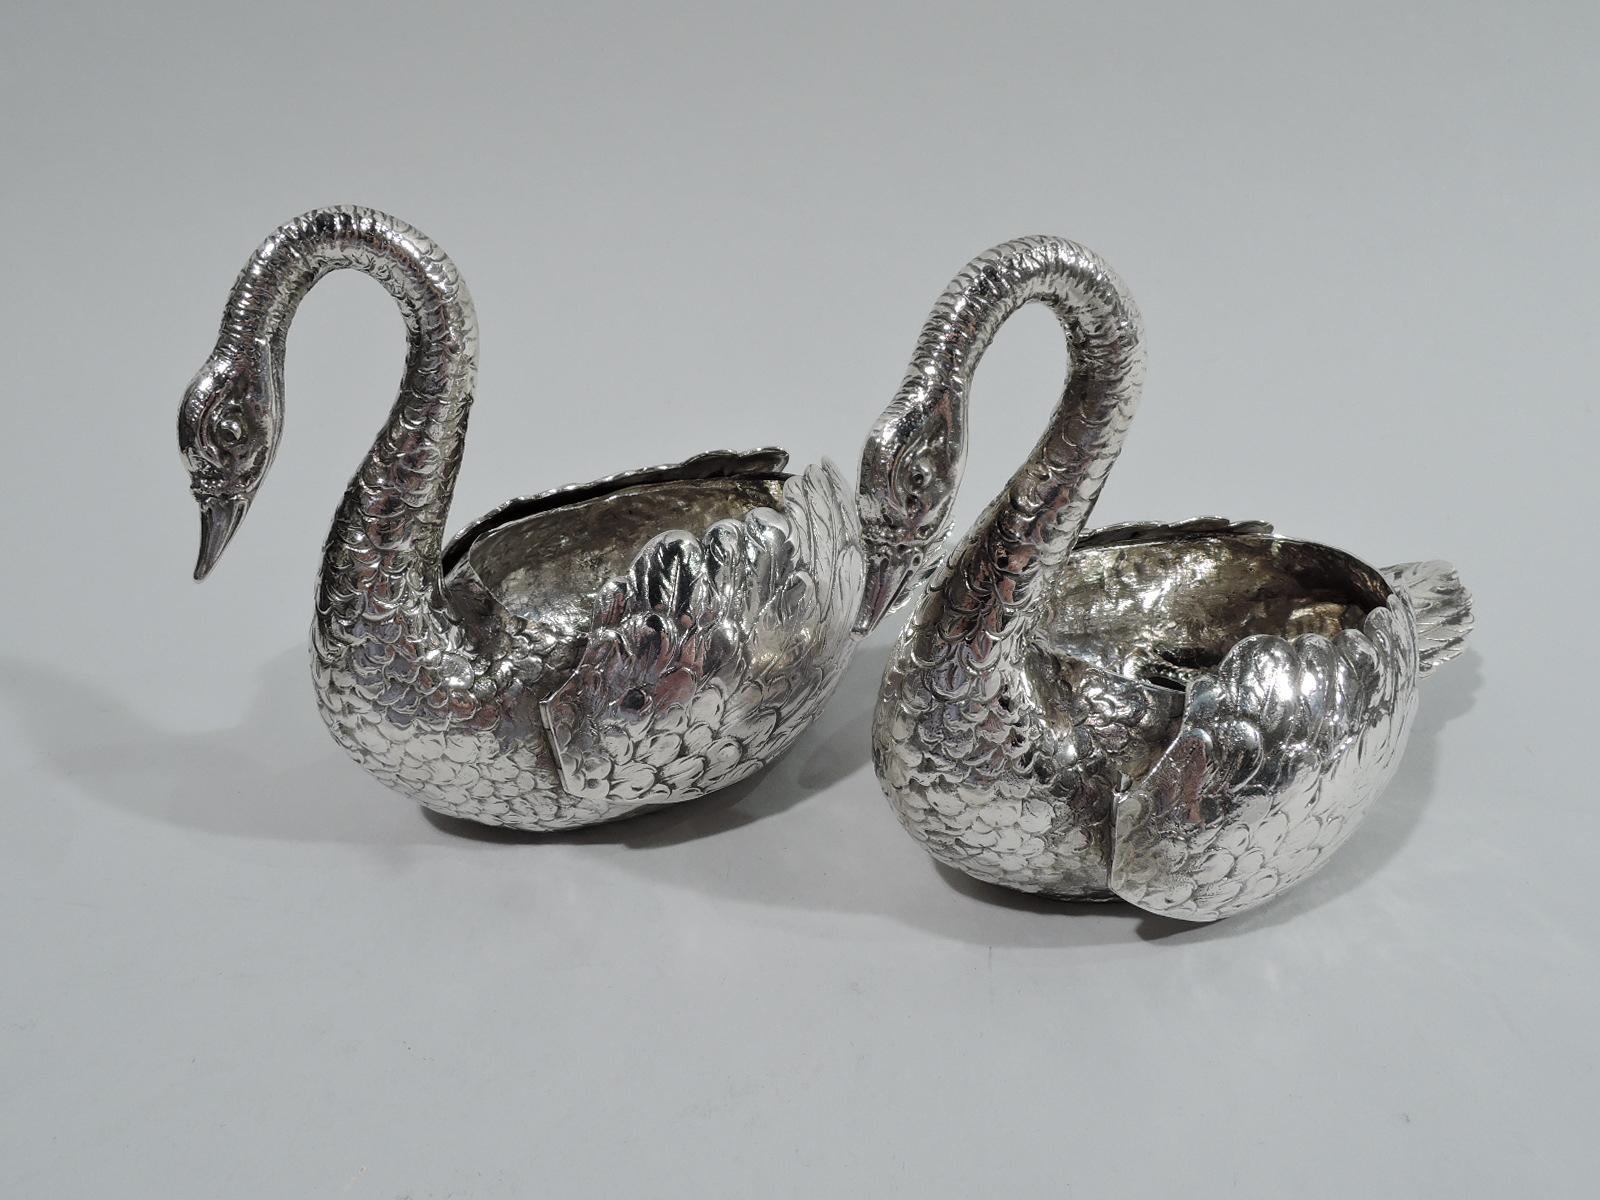 Pair of turn-of-the-century German 800 silver open salts. Each: A swan with hollow oval body and scrolled down-turned neck and head. Erect imbricated tale and plumy hinged wings. Graceful table ornaments for seasoning and treats. Marked.